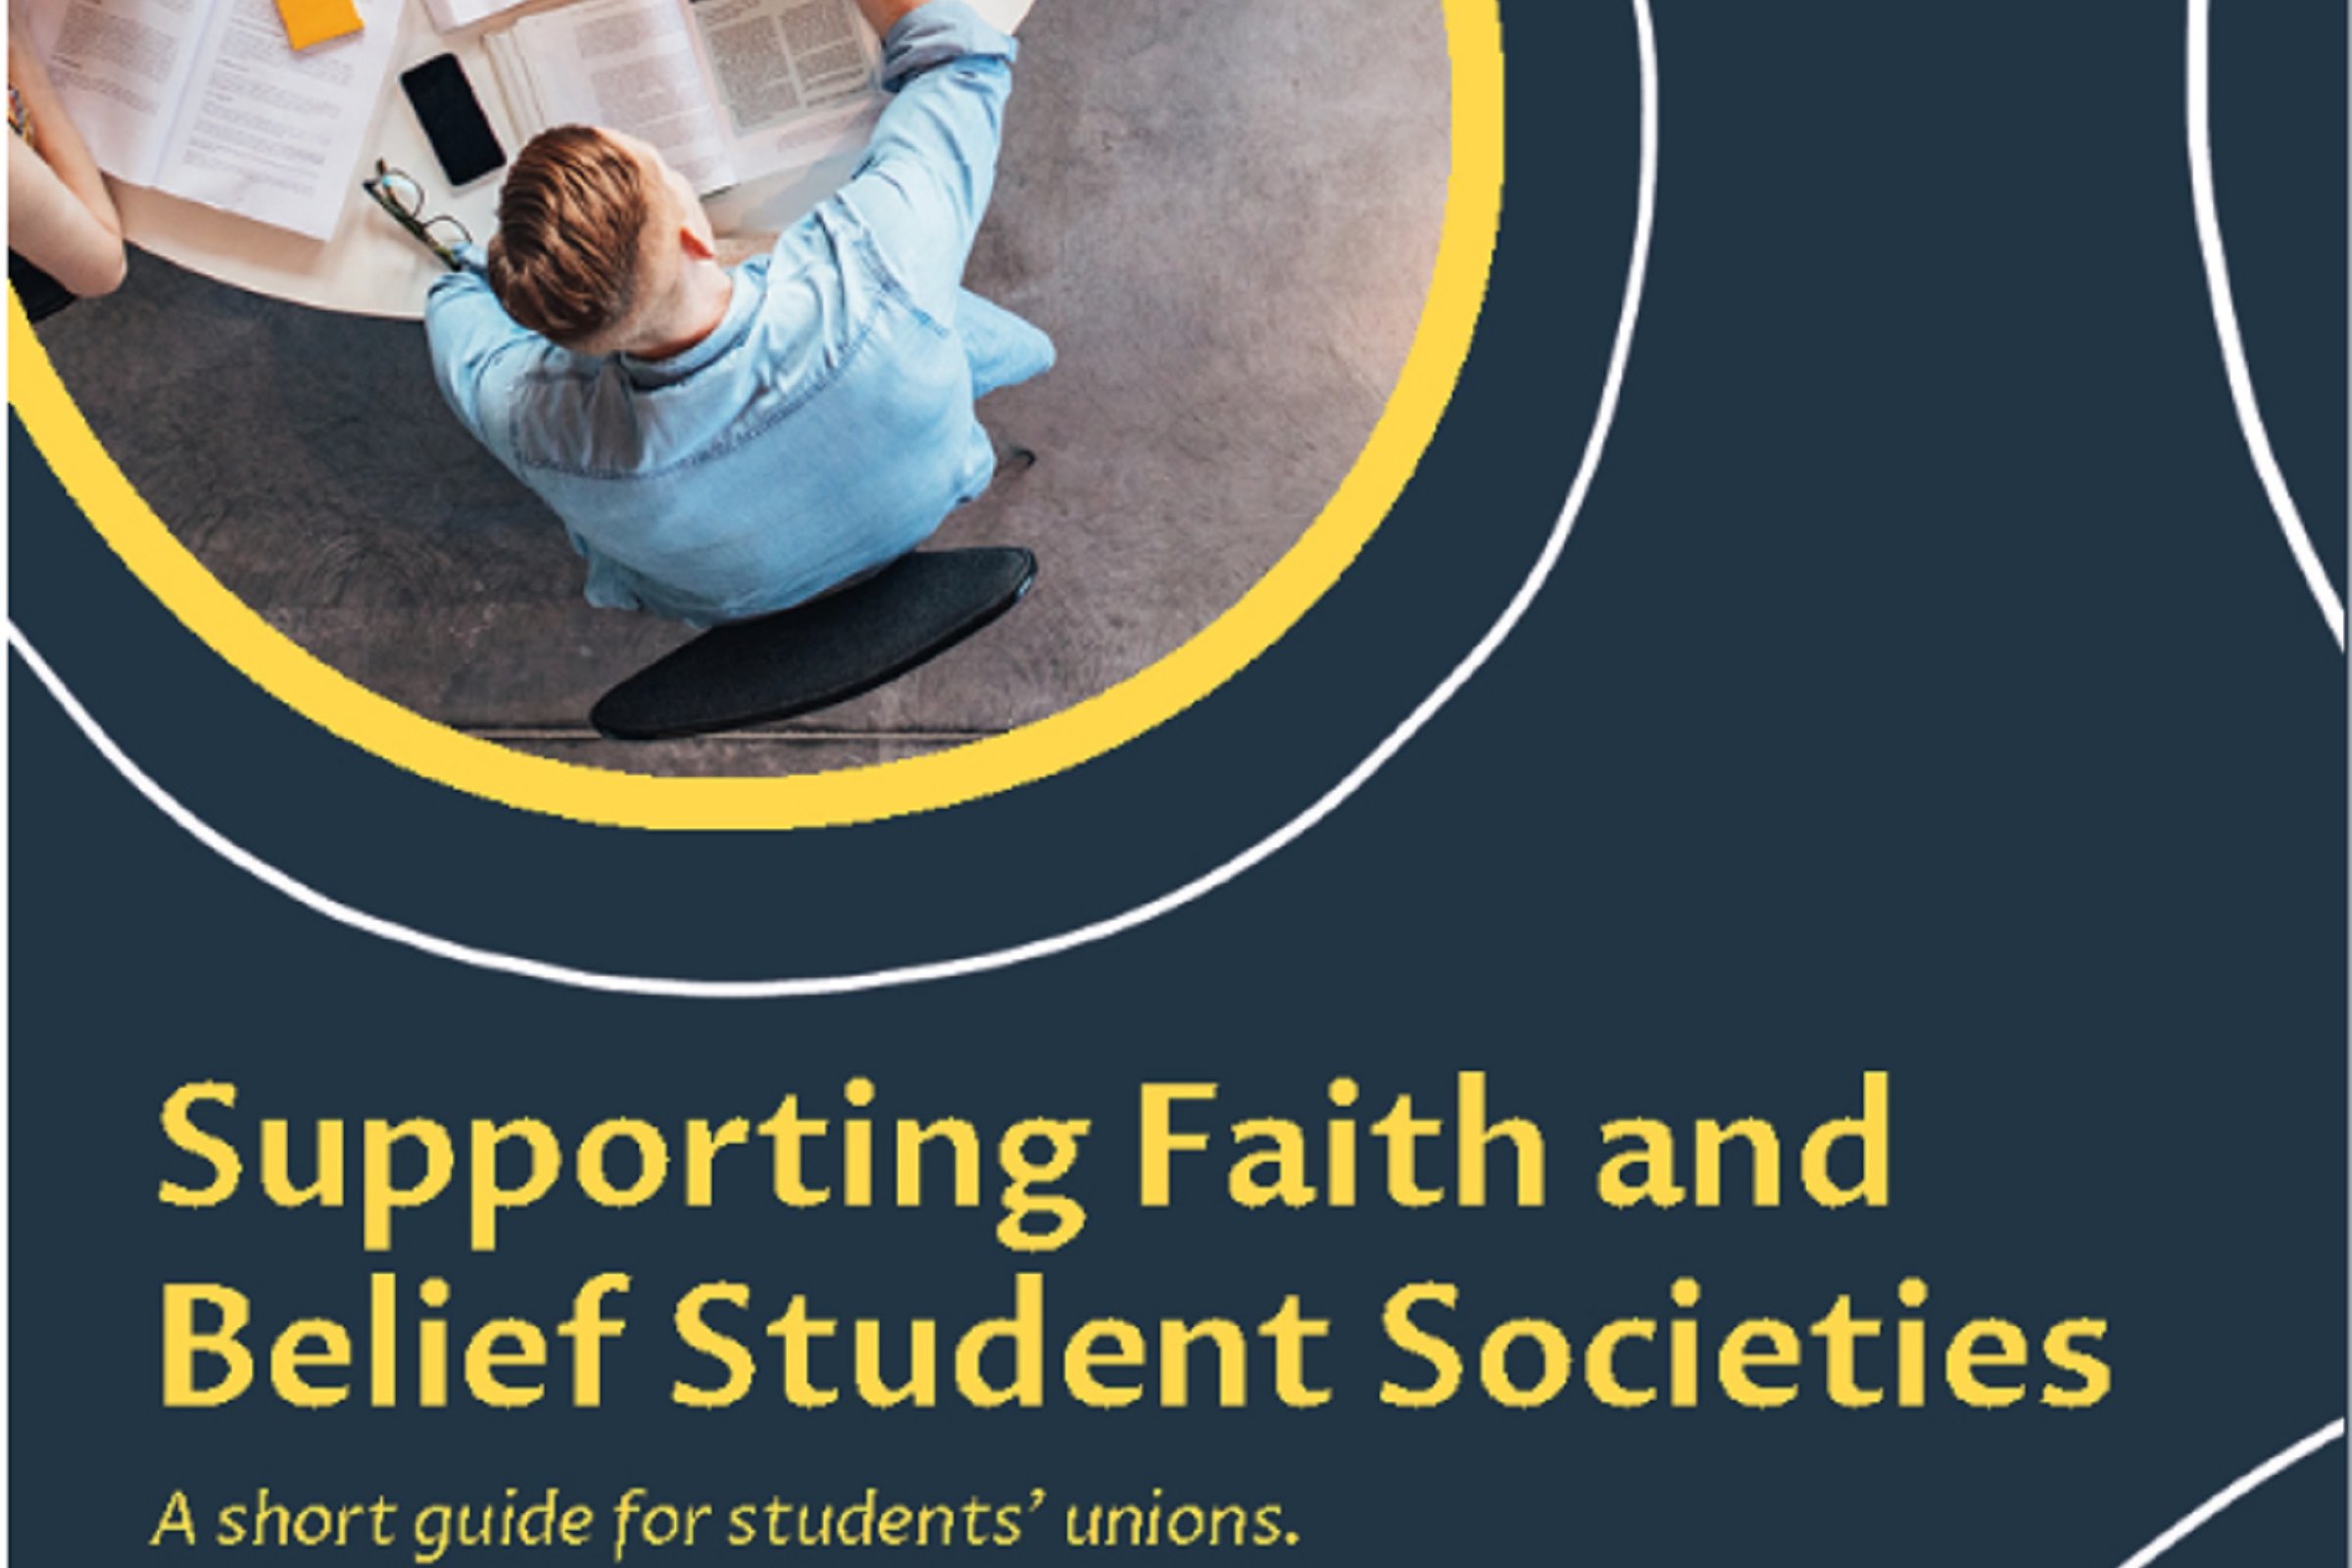 Supporting Faith and Belief Student Societies: A Guide for Students’ Unions